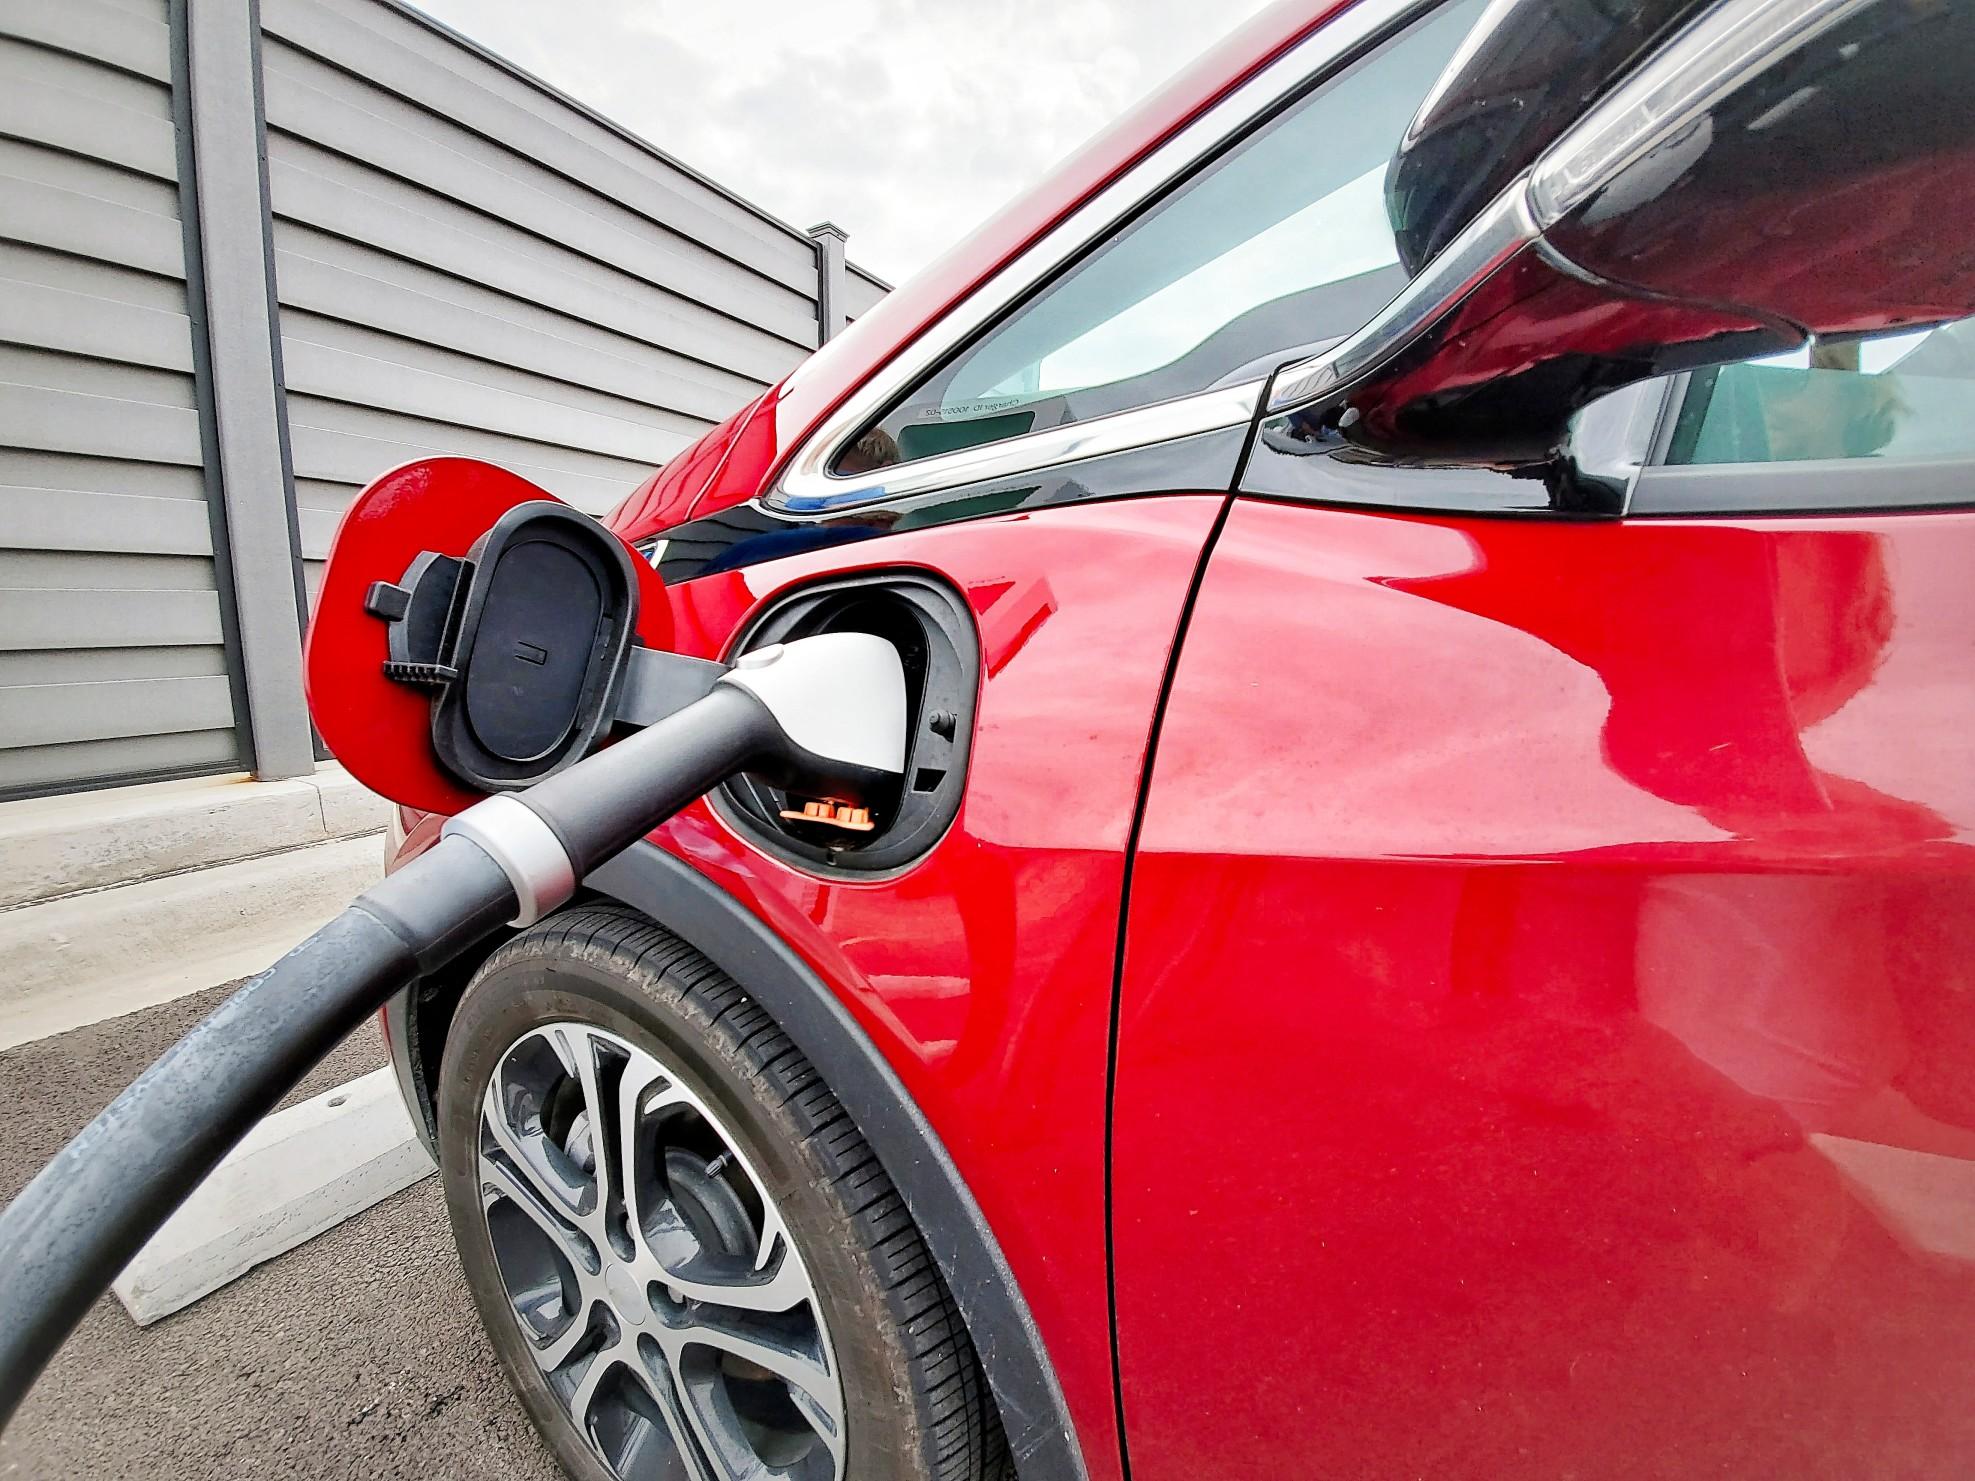 Car and Driver found several flaws in a recent study on the added costs of driving electric cars.